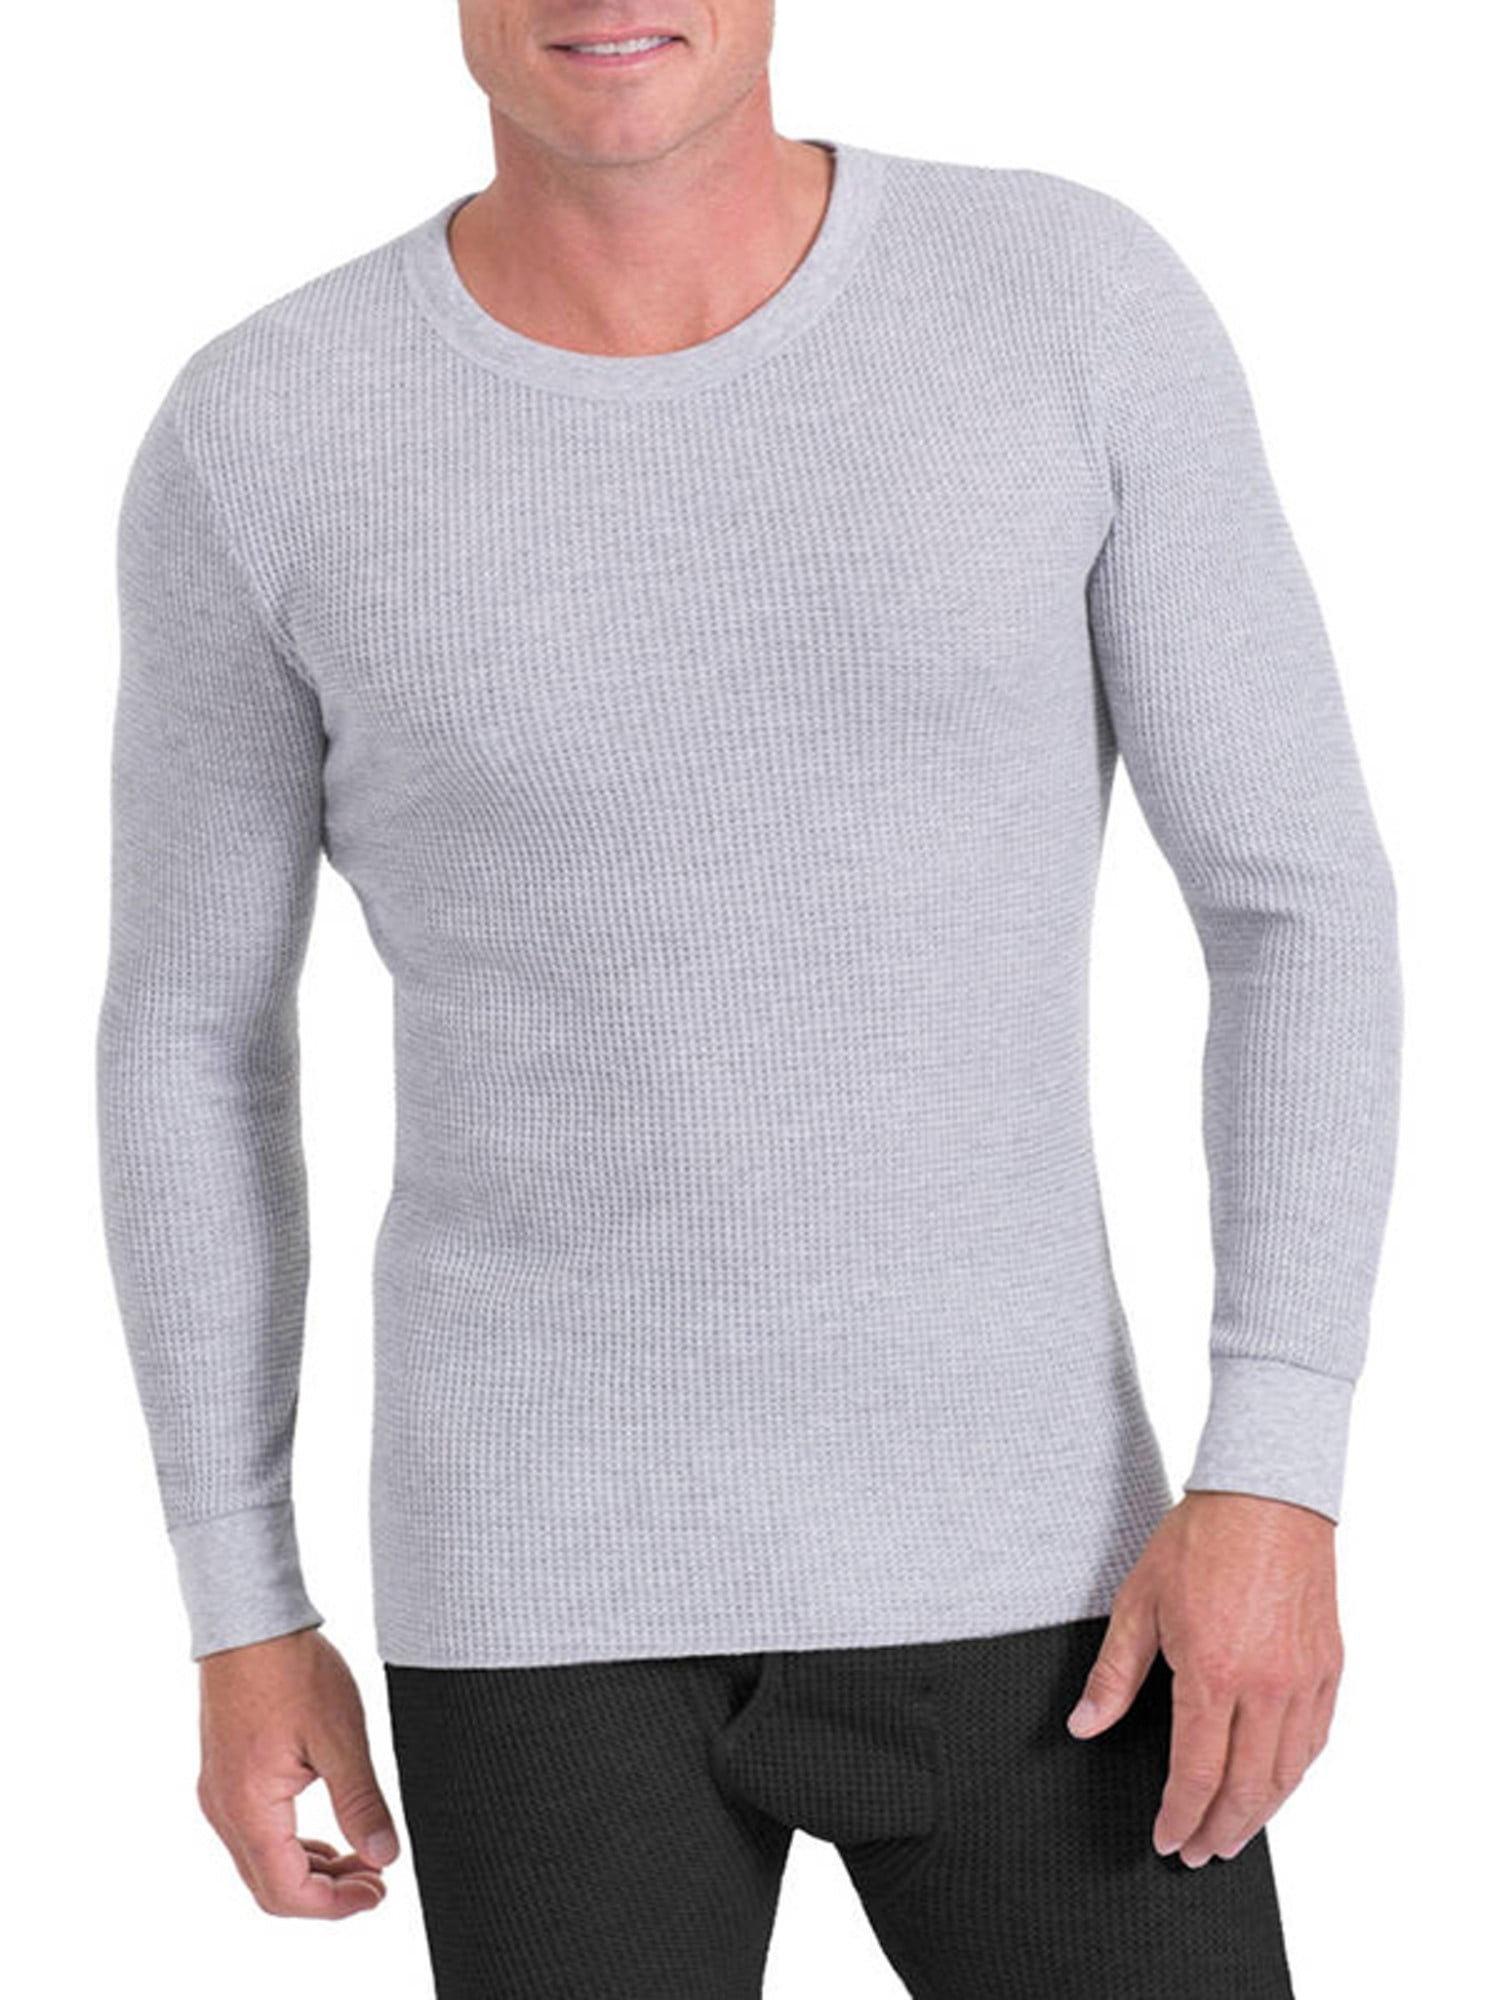 Fruit of the LoomFruit of the Loom Classic Midweight Waffle Thermal Top sous-vêtement Haut Thermique Homme Marque  